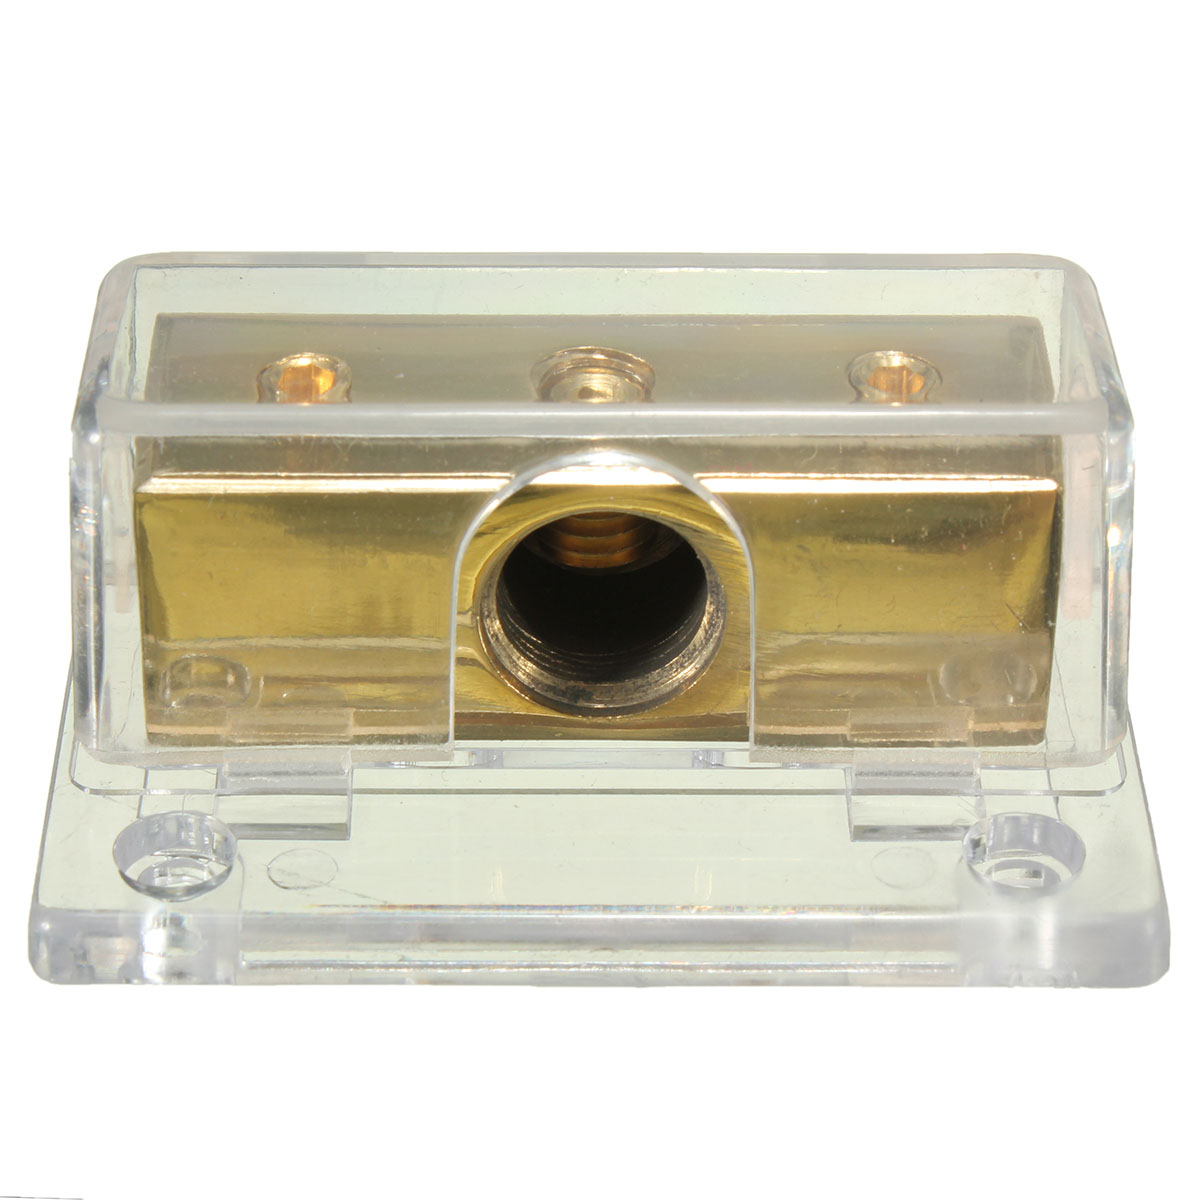 2-Way Solid Metal Power Distribution Block Splitter Gold-Plated For Cars Boats